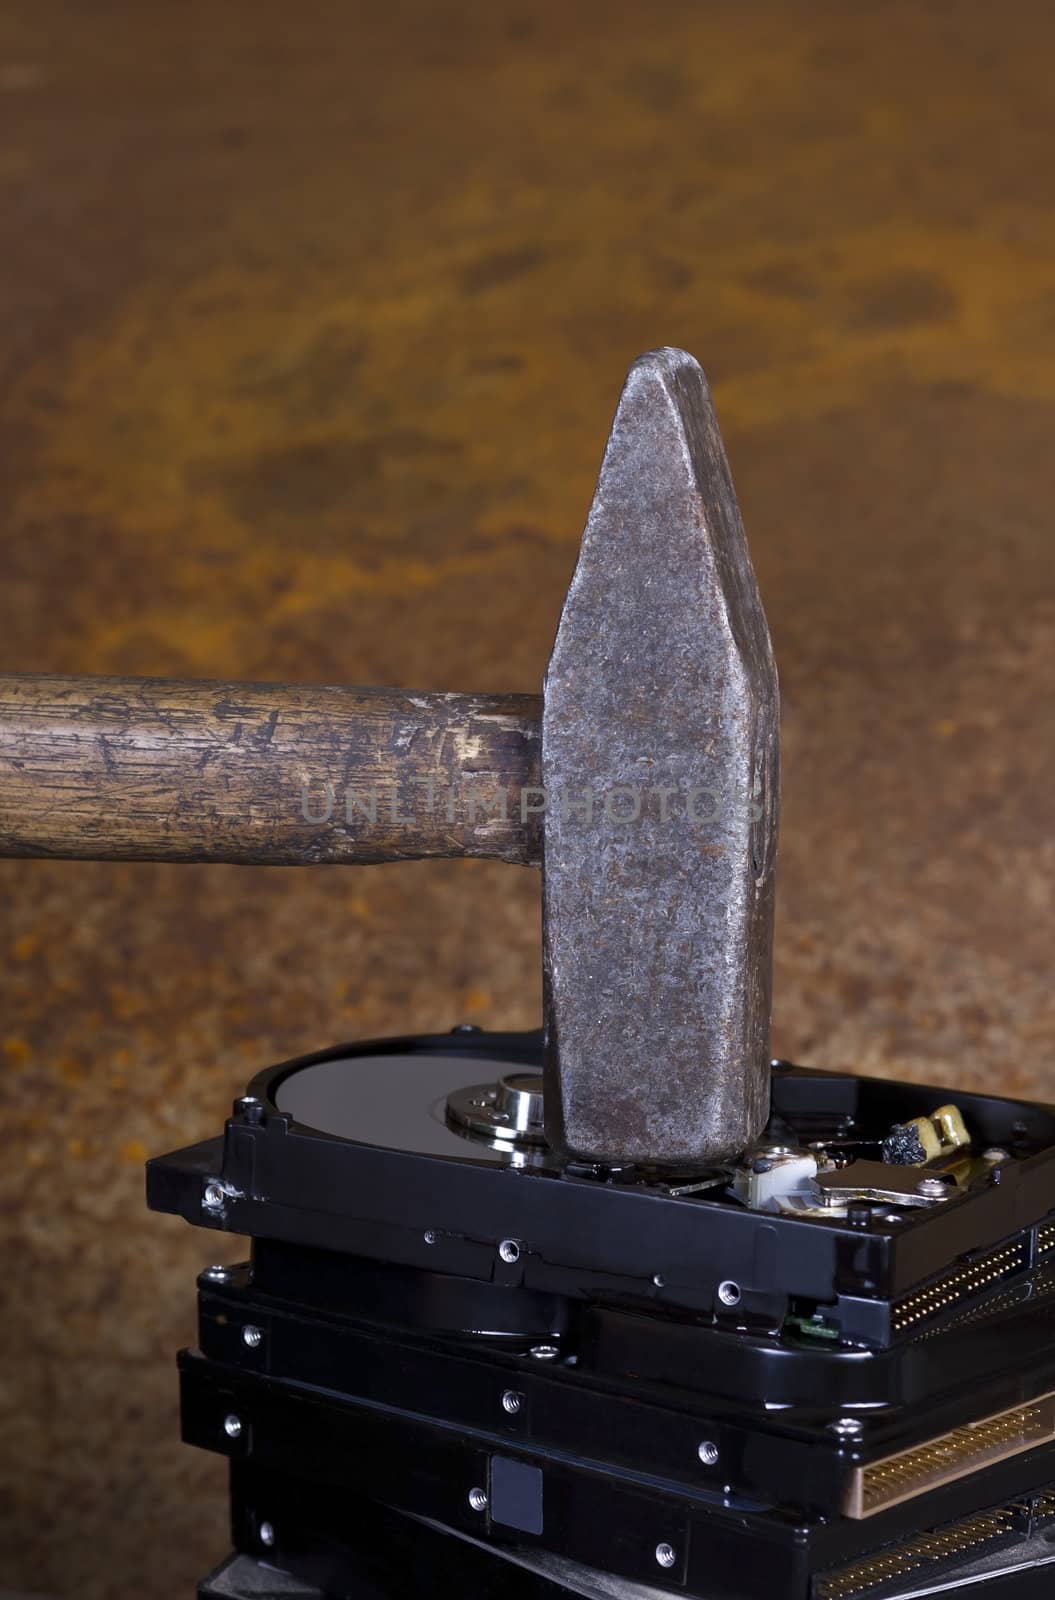 hammer on stack of hard disk in rusty background